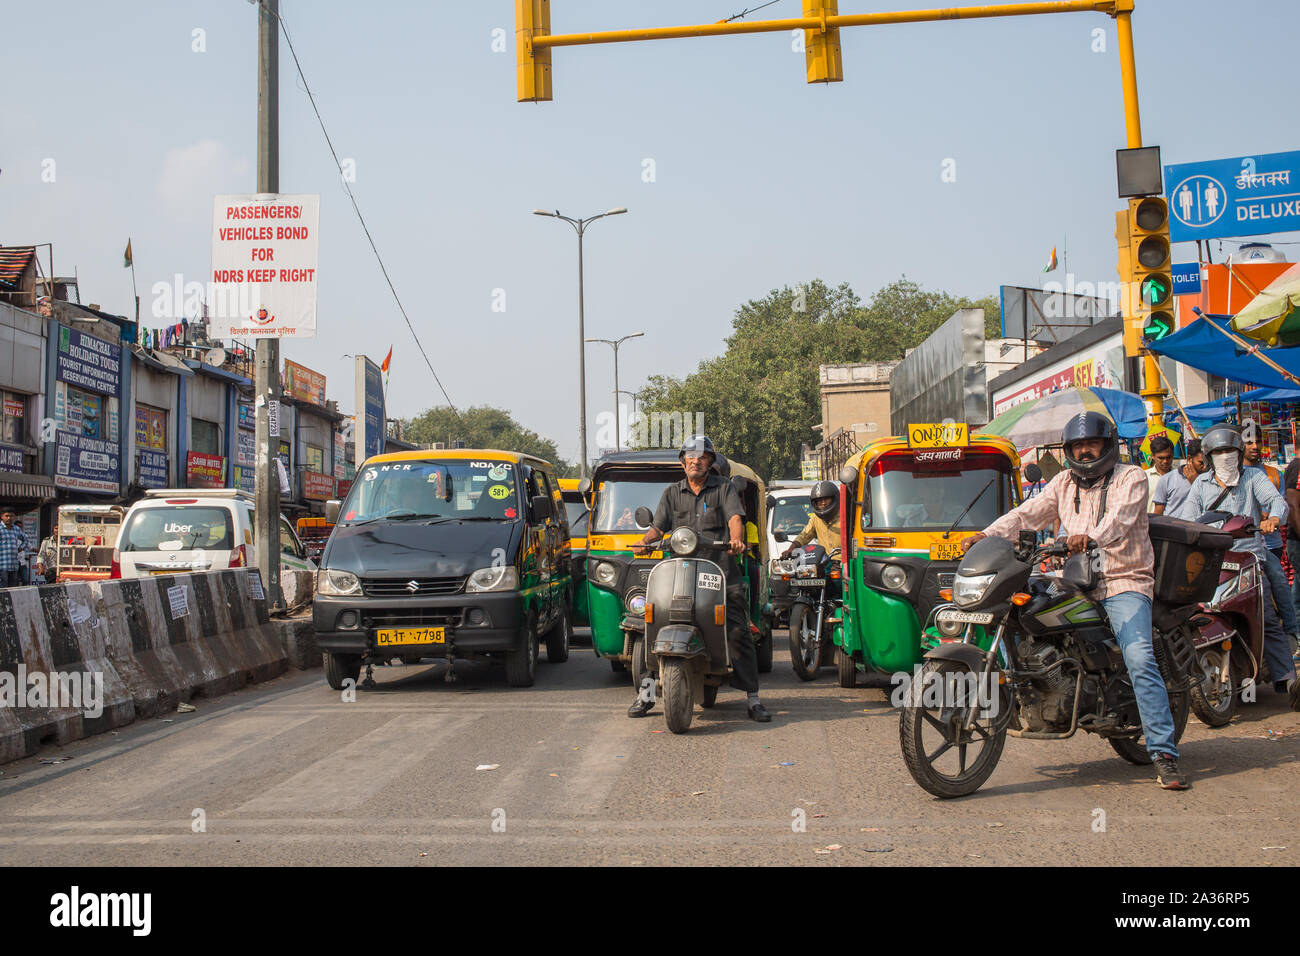 Lots of vehicles standing at a traffic stop in New Delhi Stock Photo